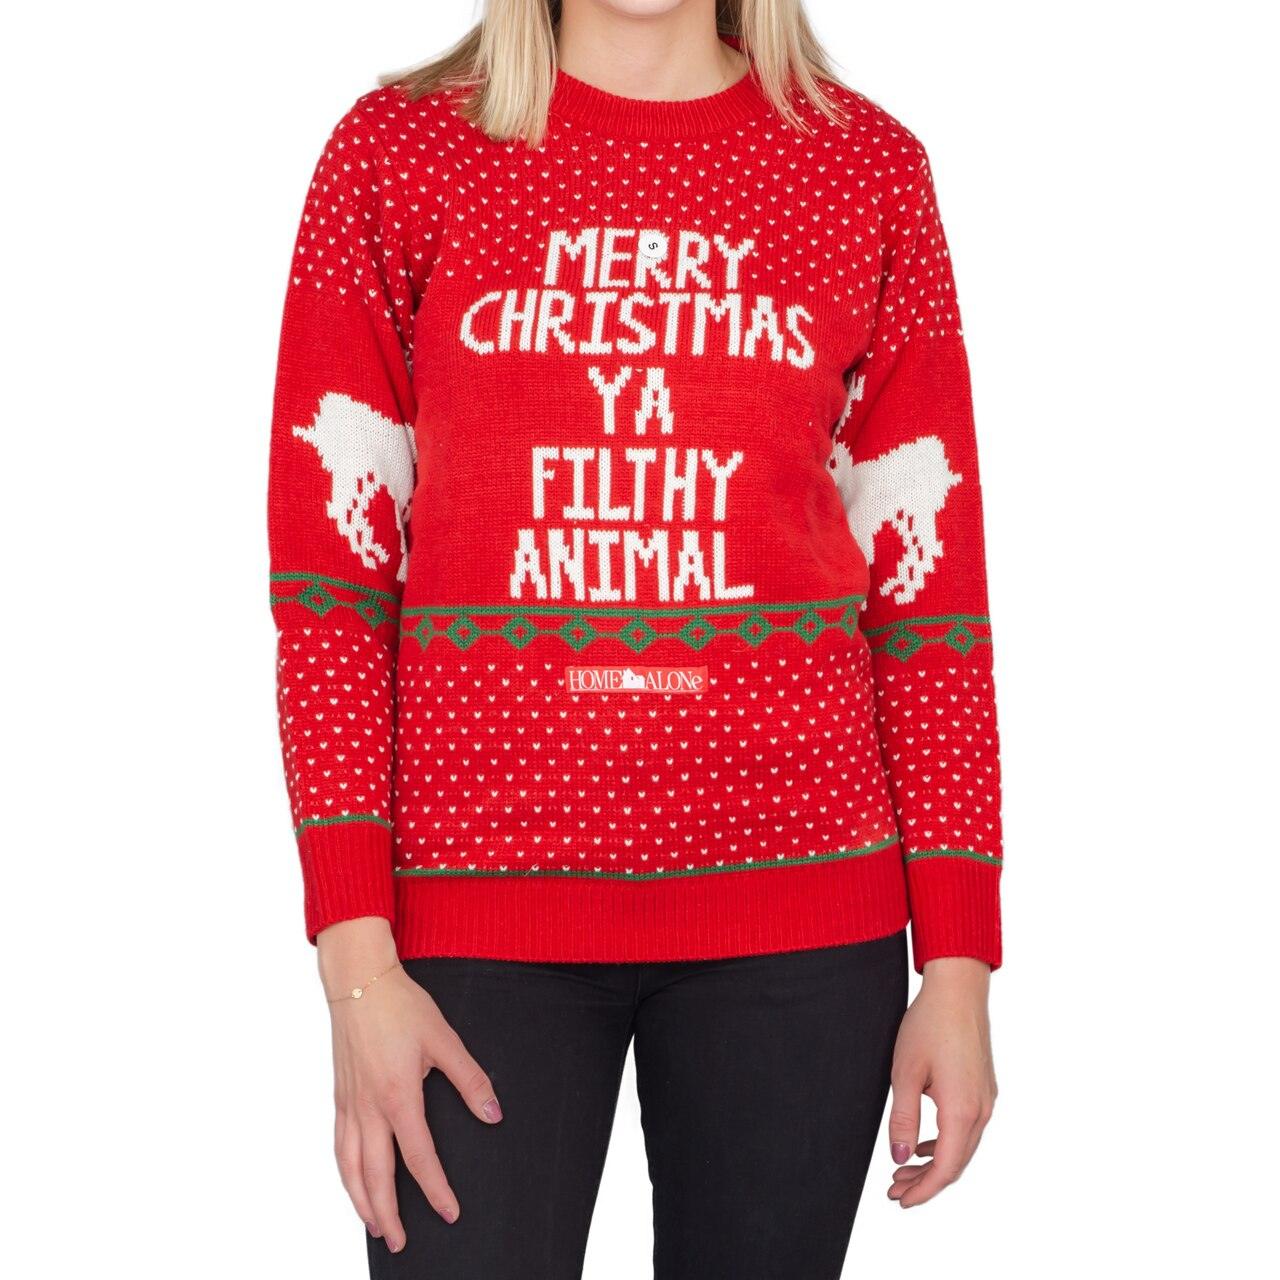 Home Alone Movie Christmas Sweater Apparel | Shop Online